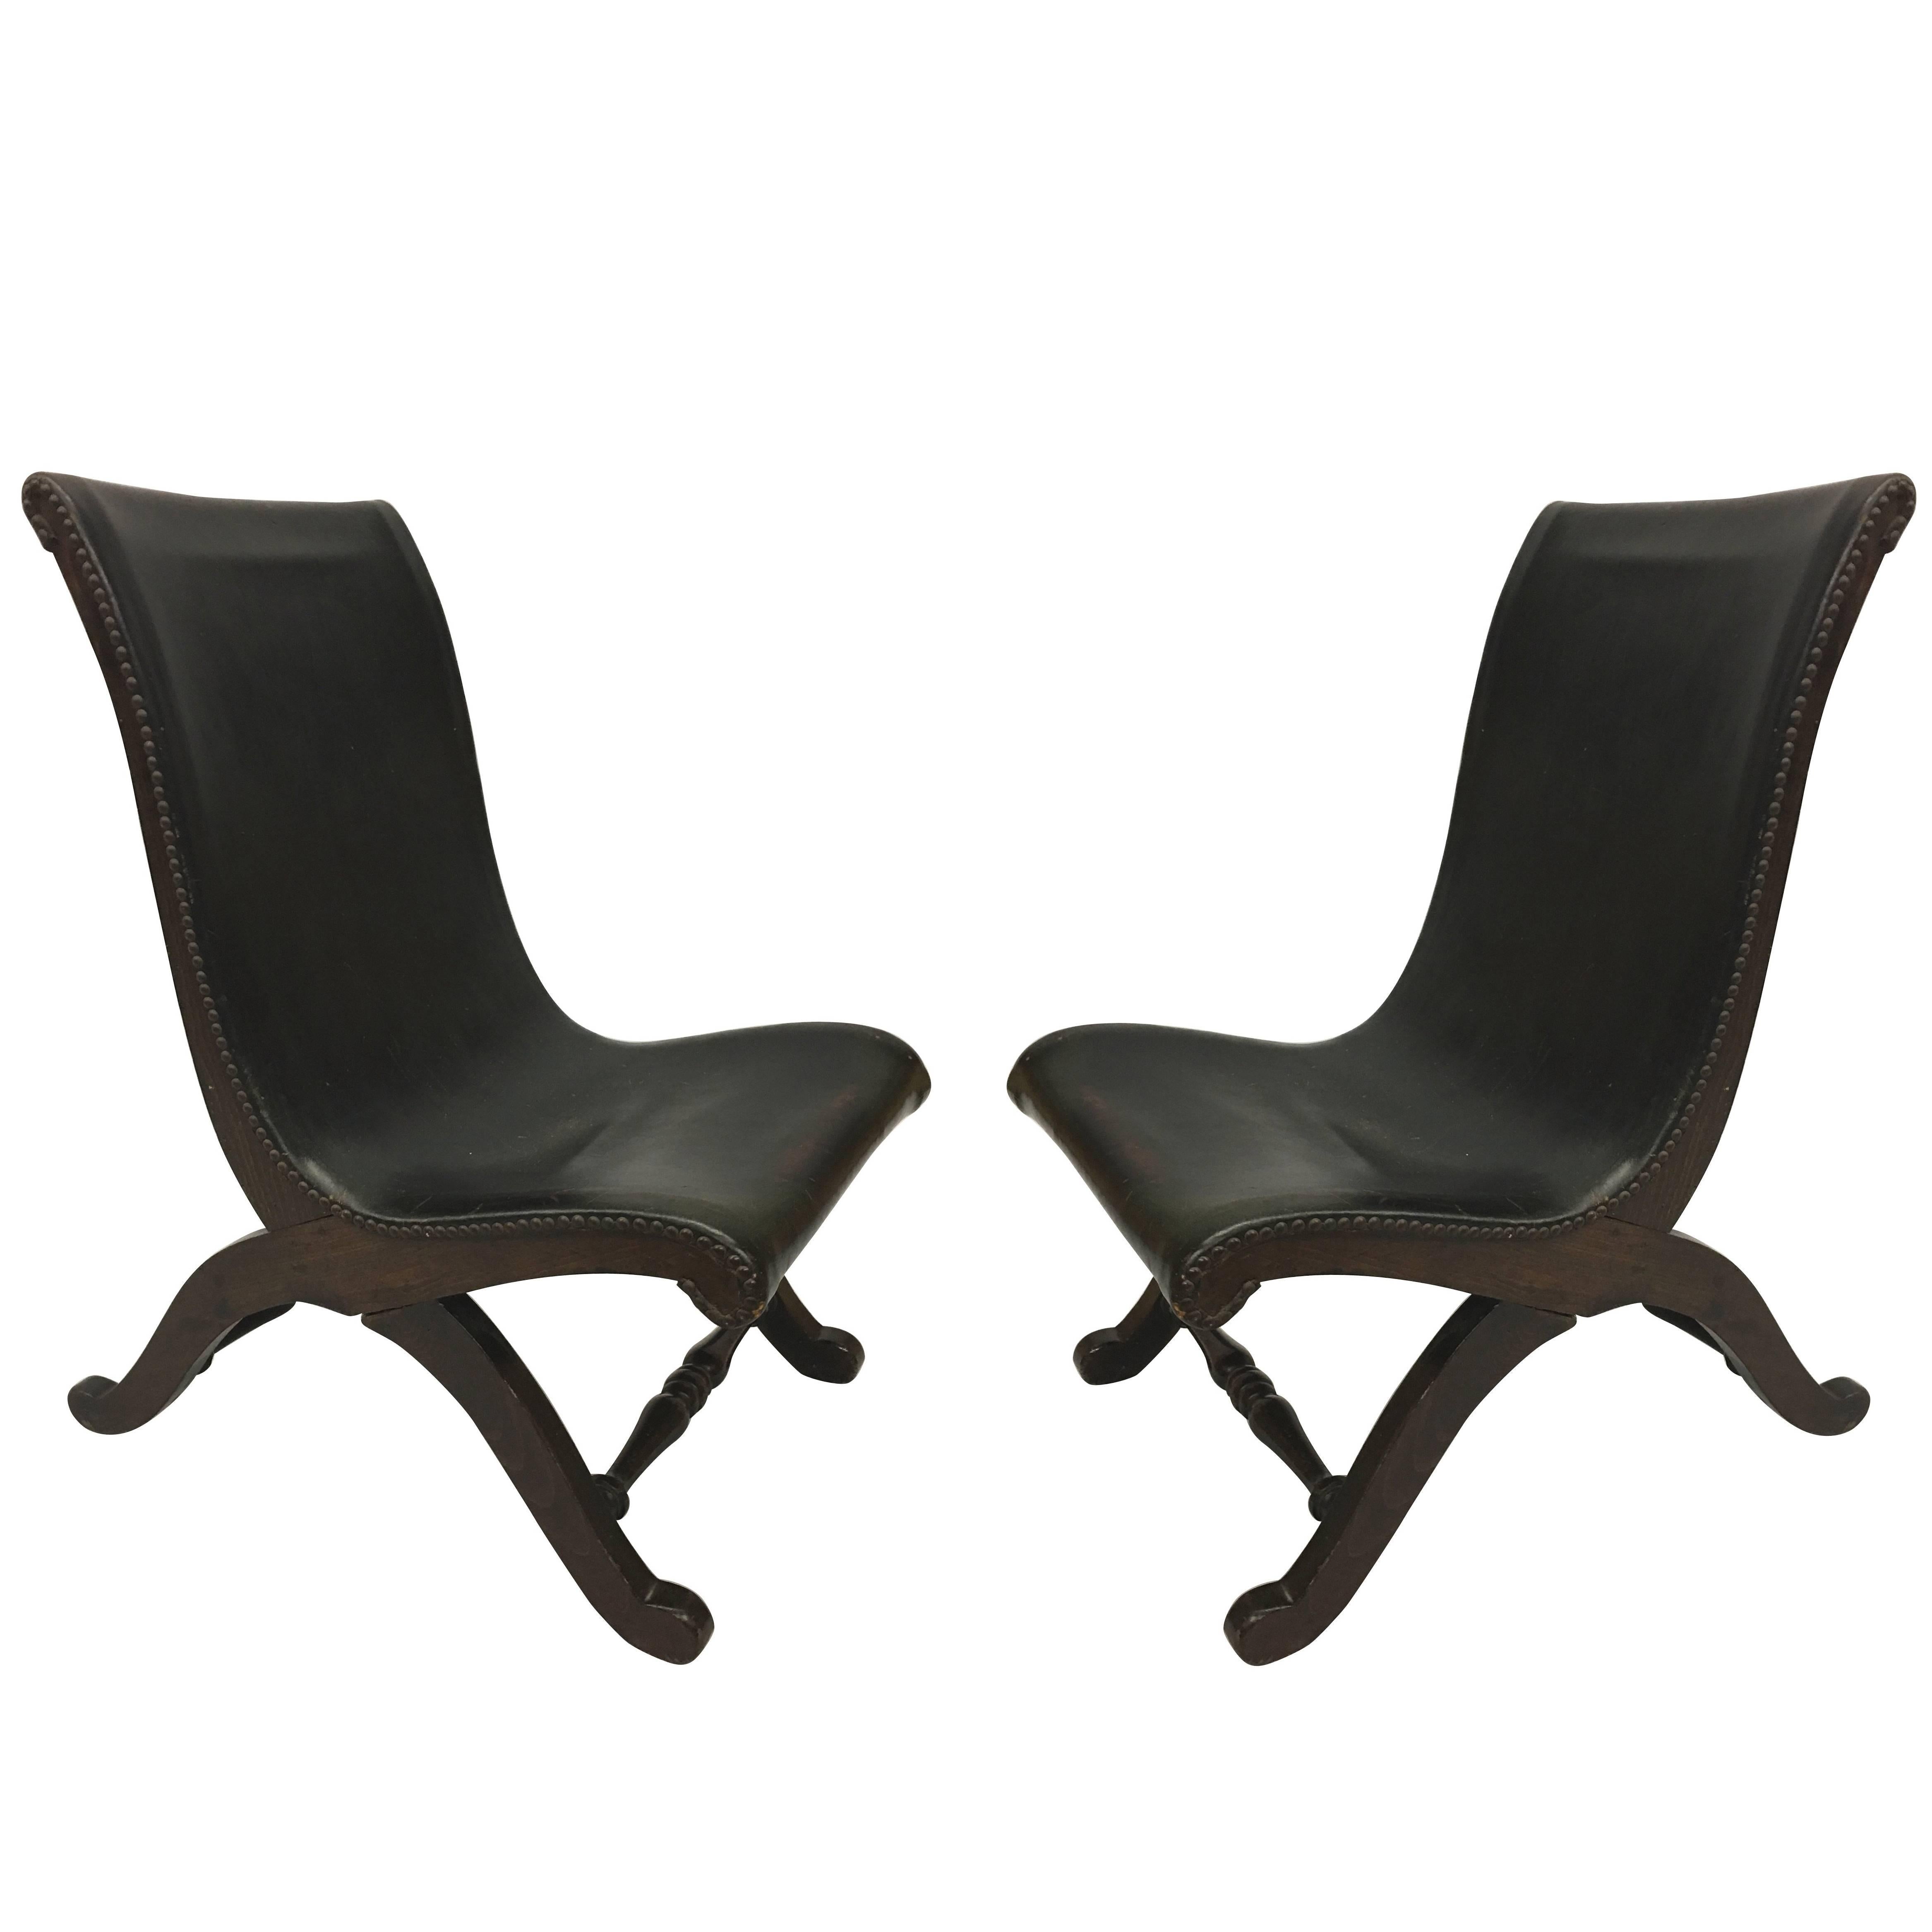 3 Mid-Century Modern Neoclassical Slipper / Lounge Chairs, Pierre Lottier, 1940  For Sale